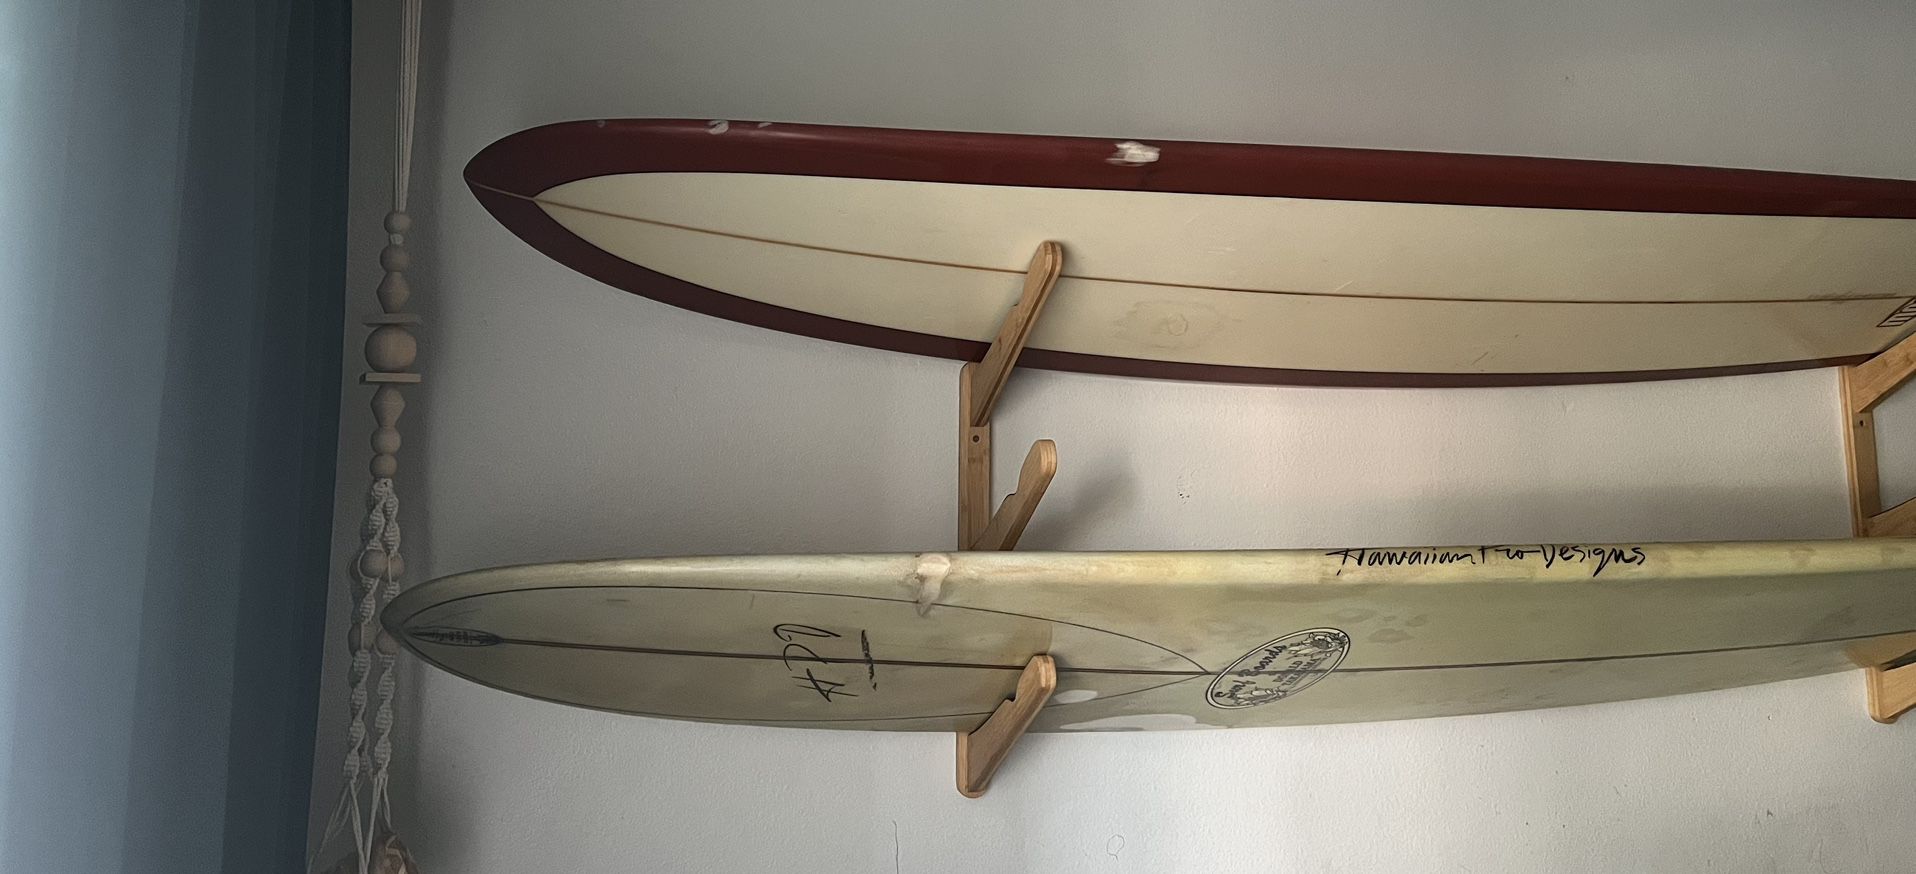 Surfboards and Surfboard mount all for $800 Obo (Signed)